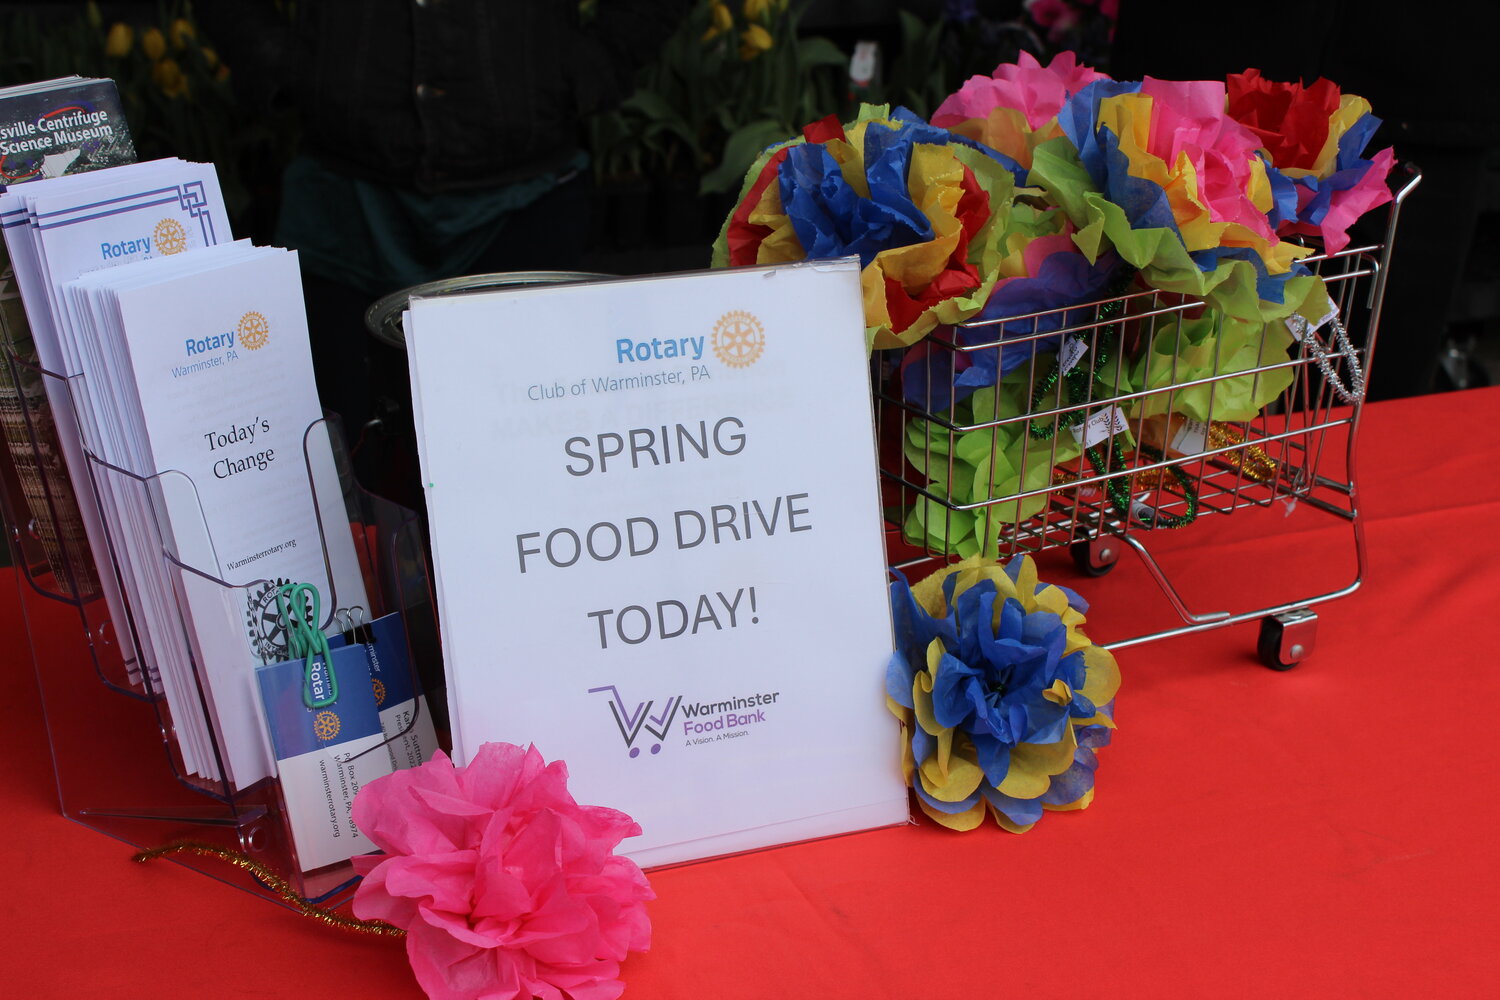 Children and adults who donated to the spring food drive were treated to spring flowers courtesy of Warminster Rotary.